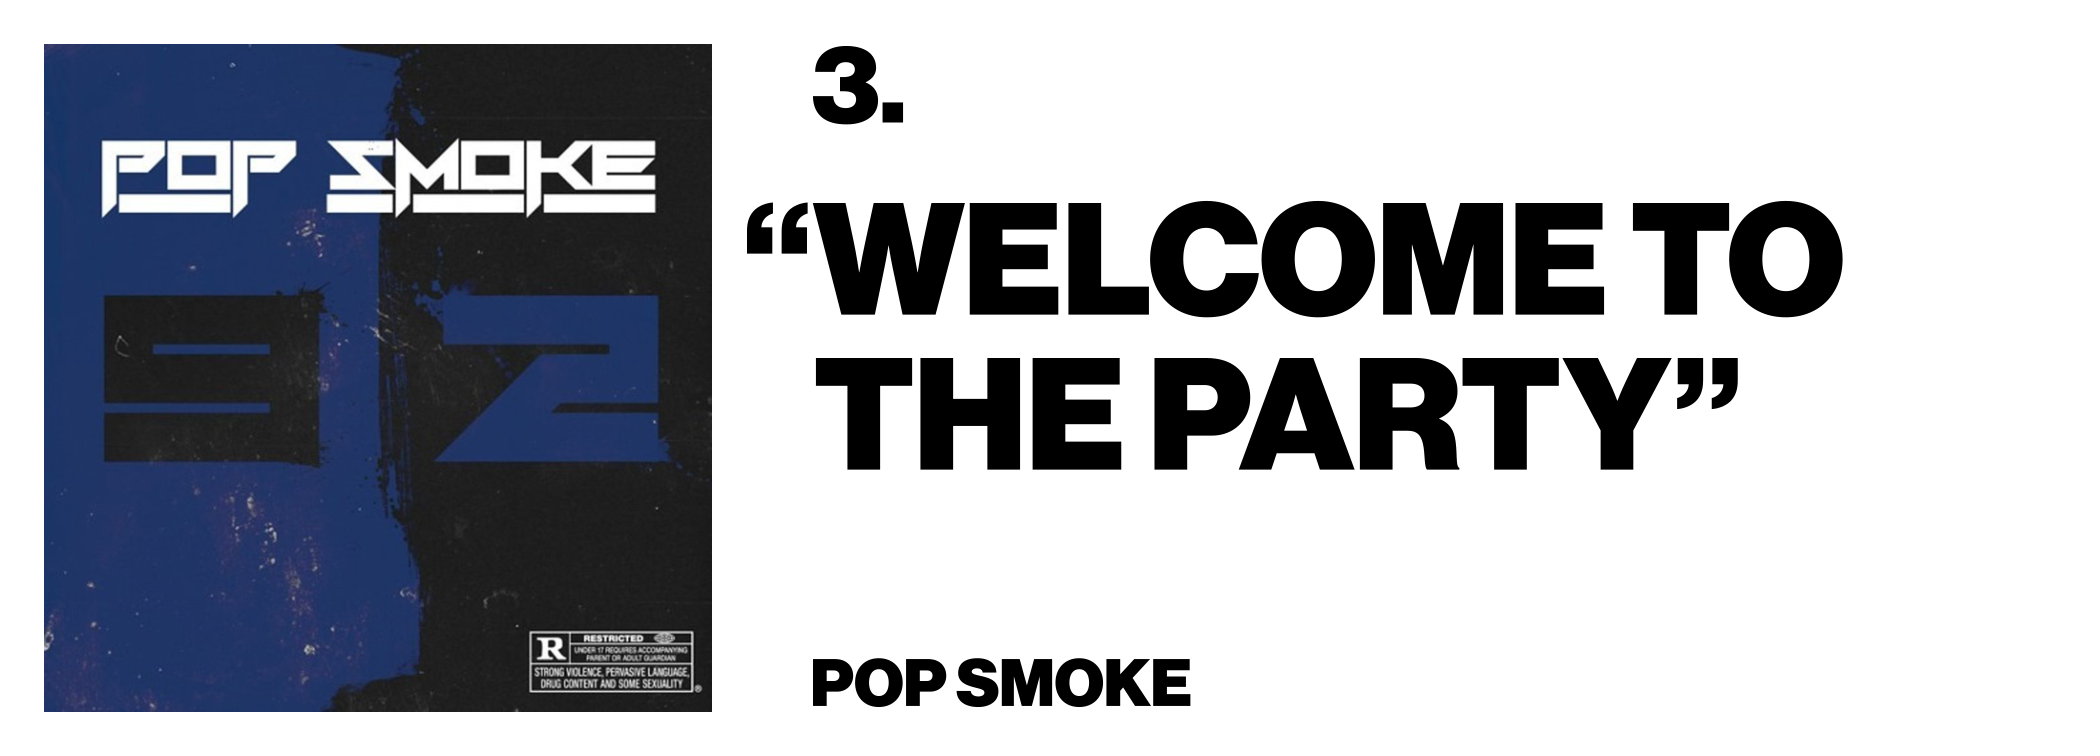 Pop Smoke Welcome To The Party Lyrics Meaning